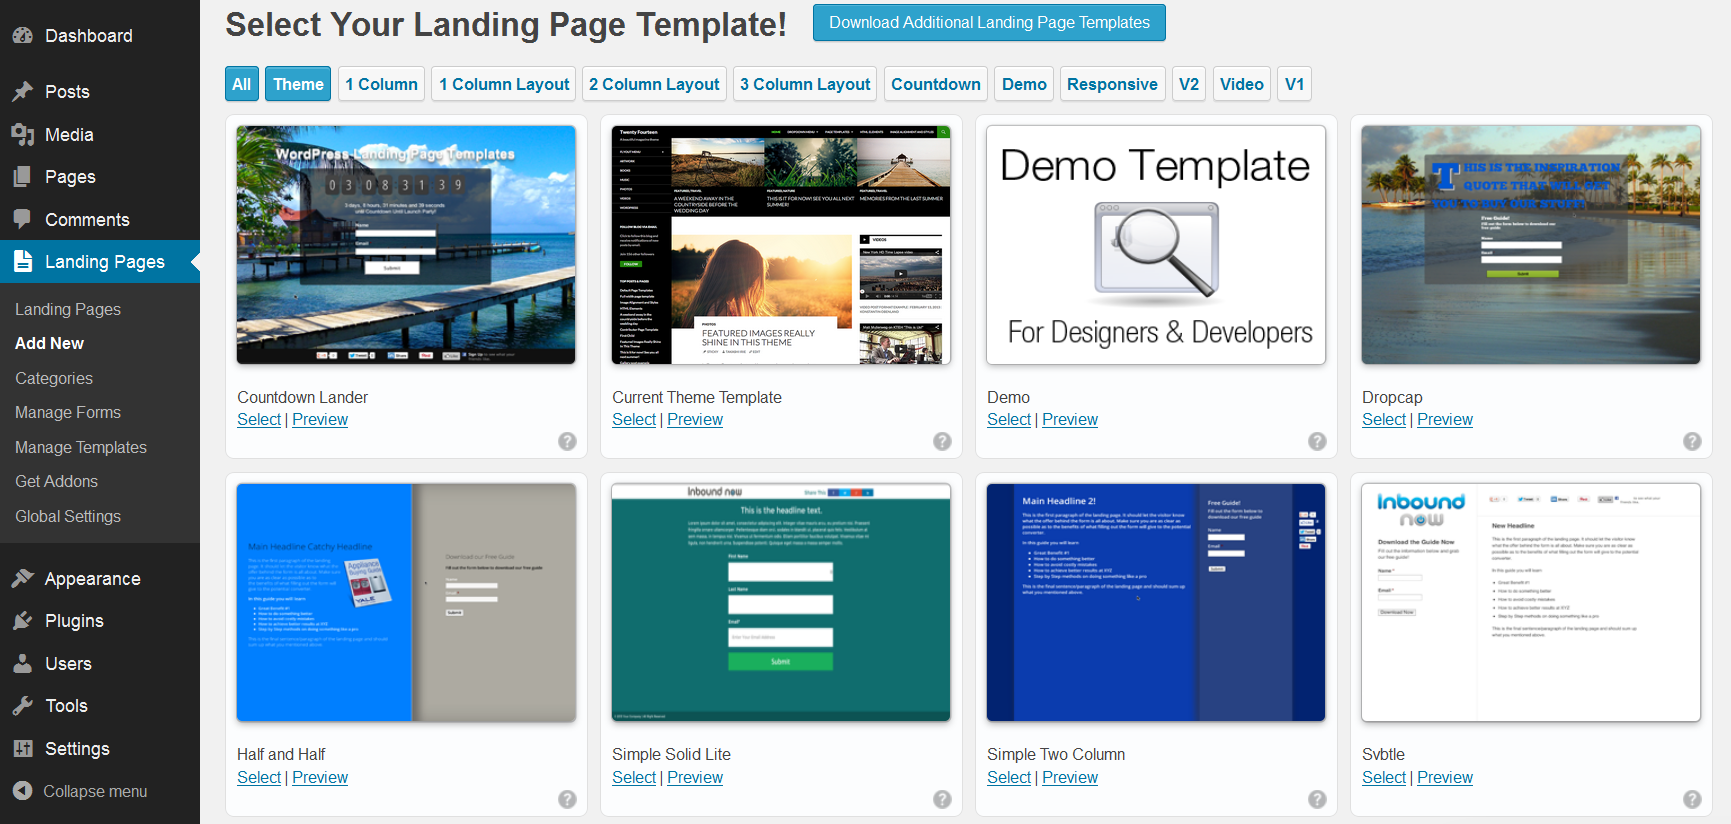 Overview of landing page templates